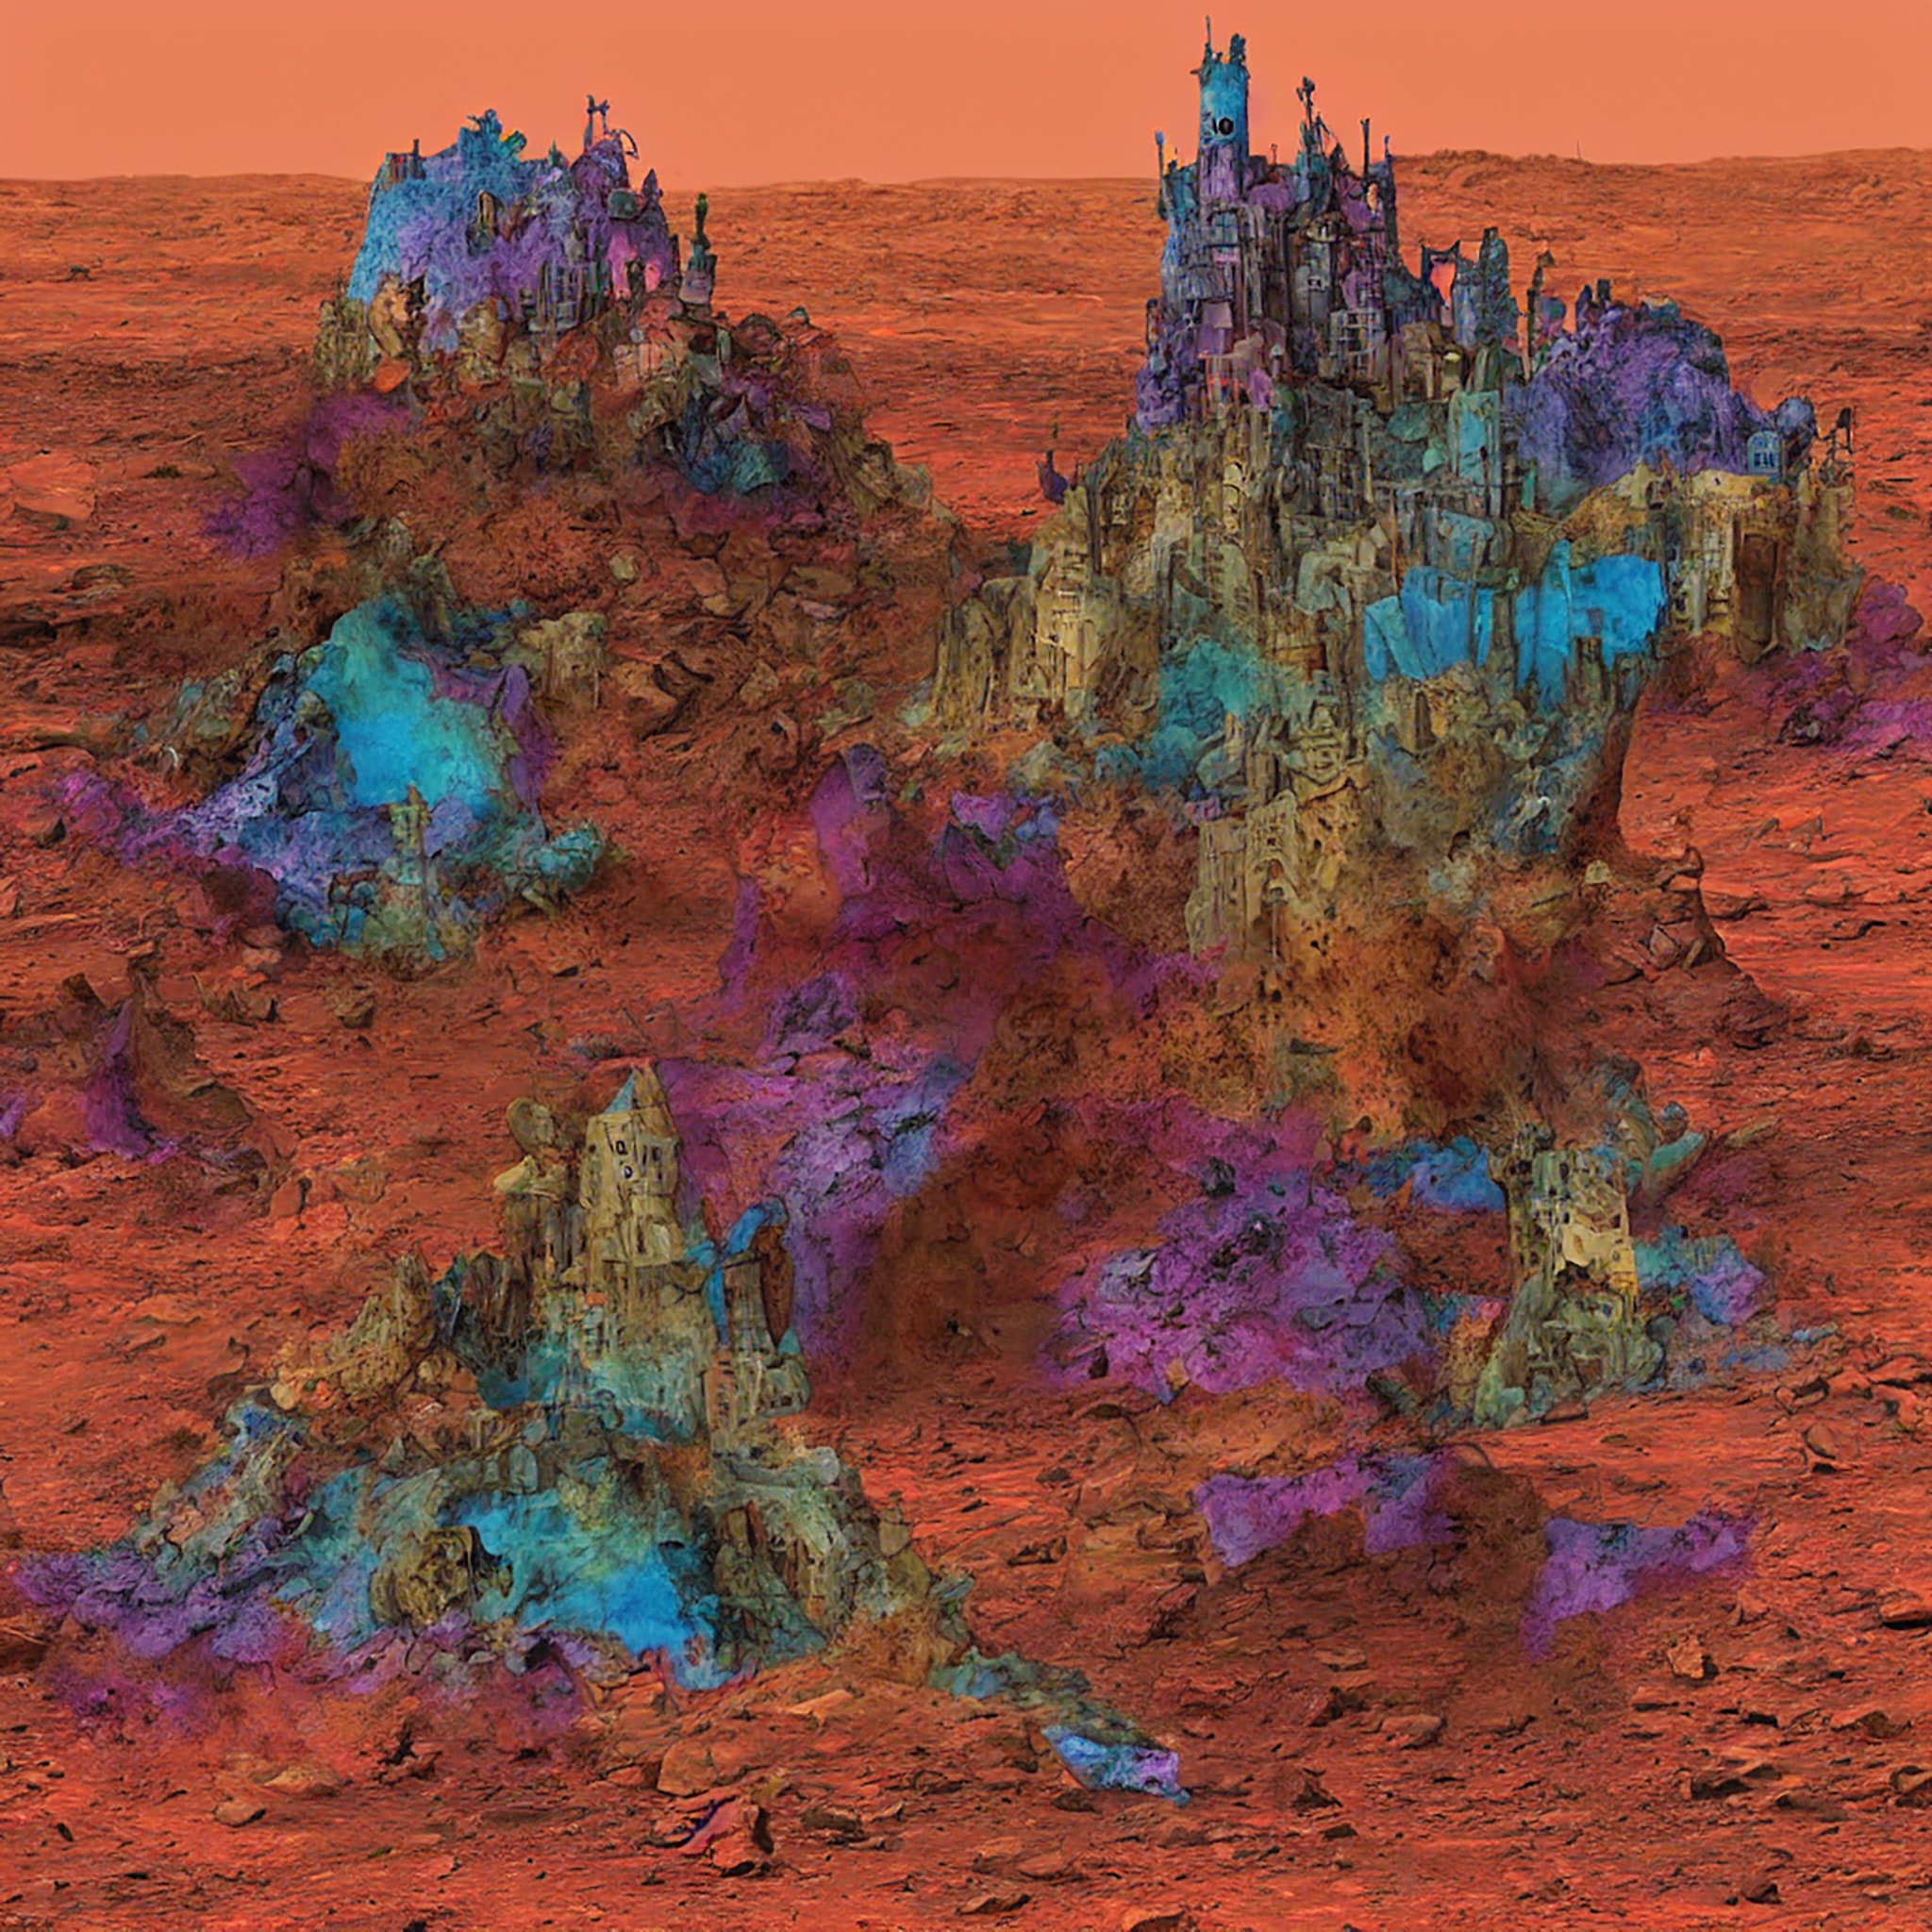 Imploded_colorful_fairytale_castle_on_Mars